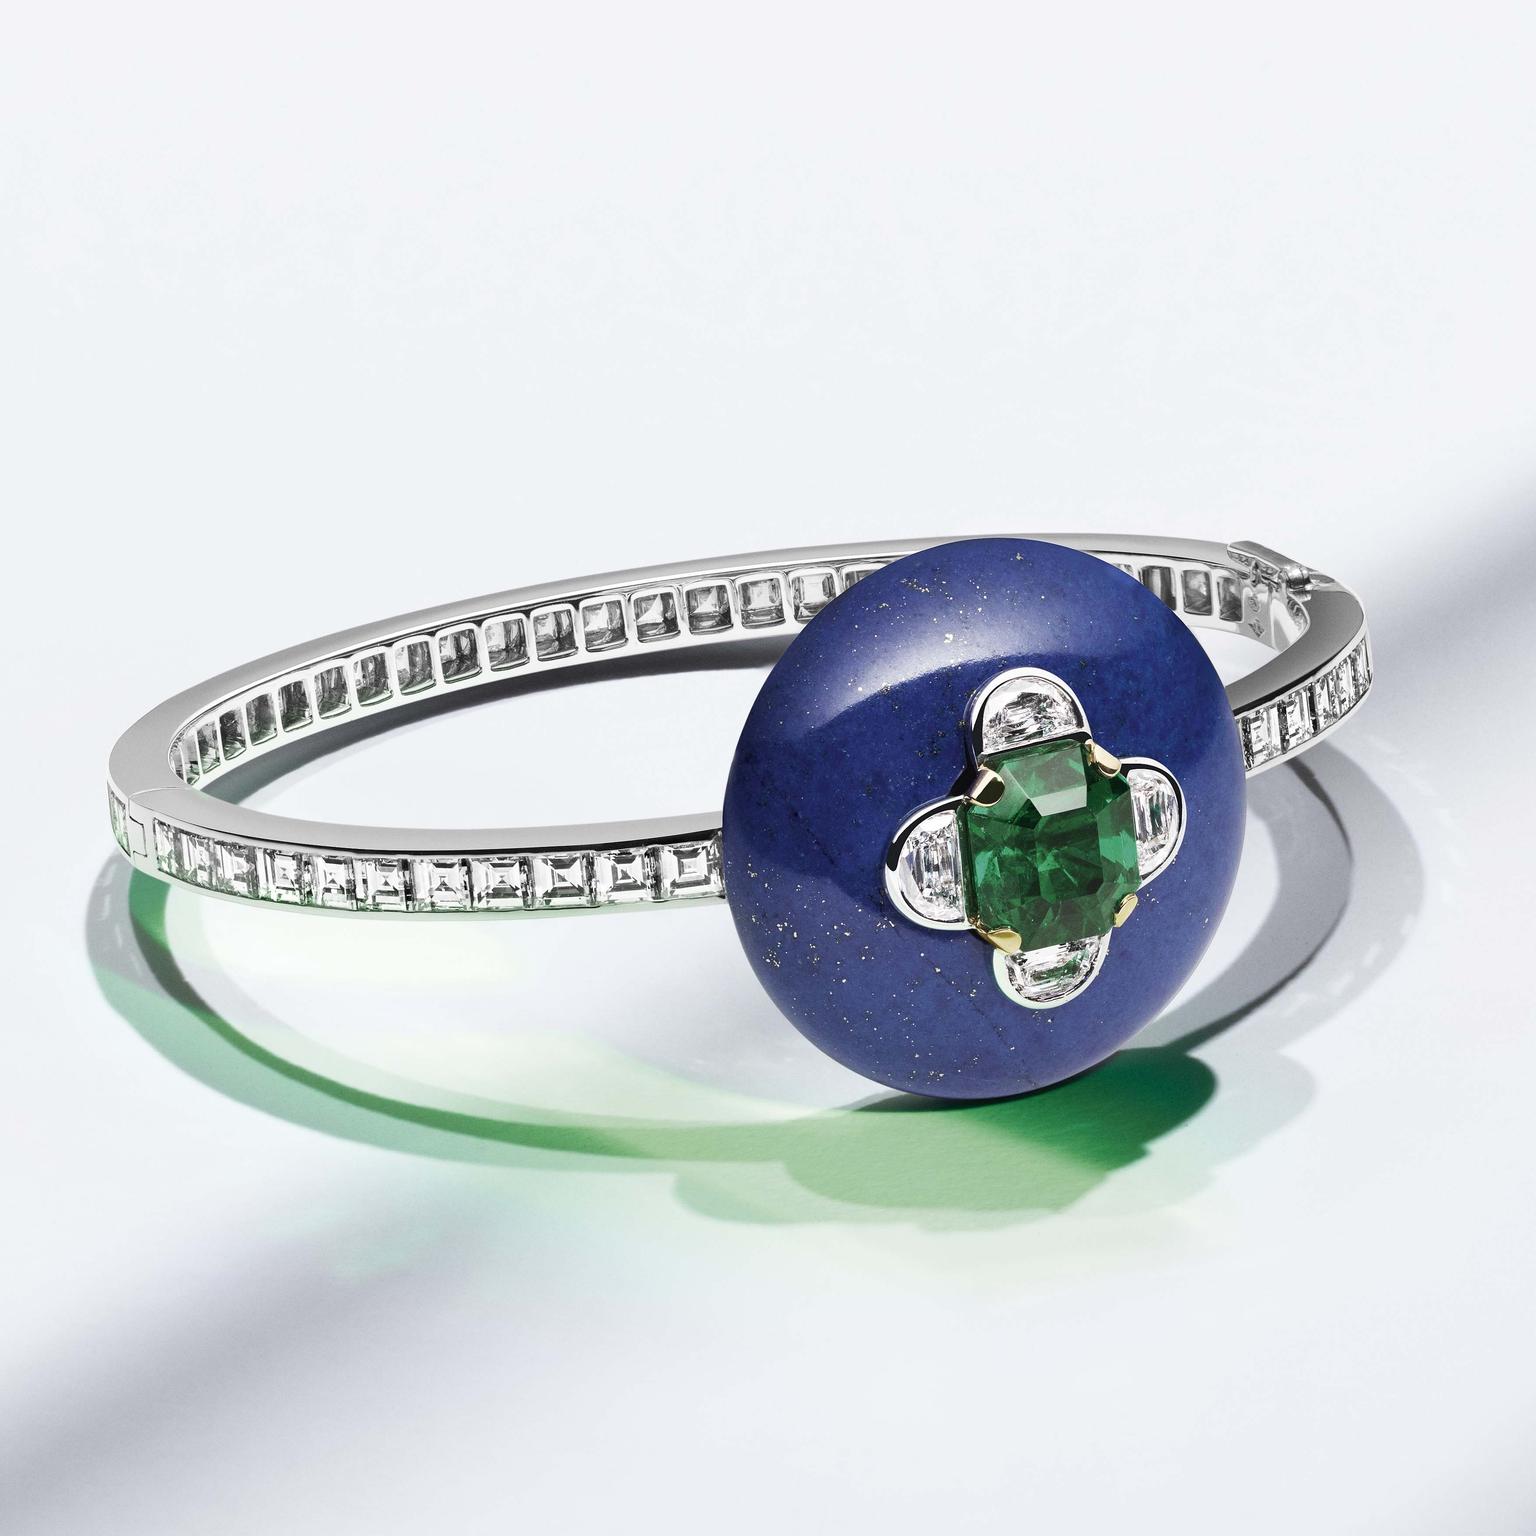 Louis Vuitton Riders of the Knights Le Royaume diamond and emerald